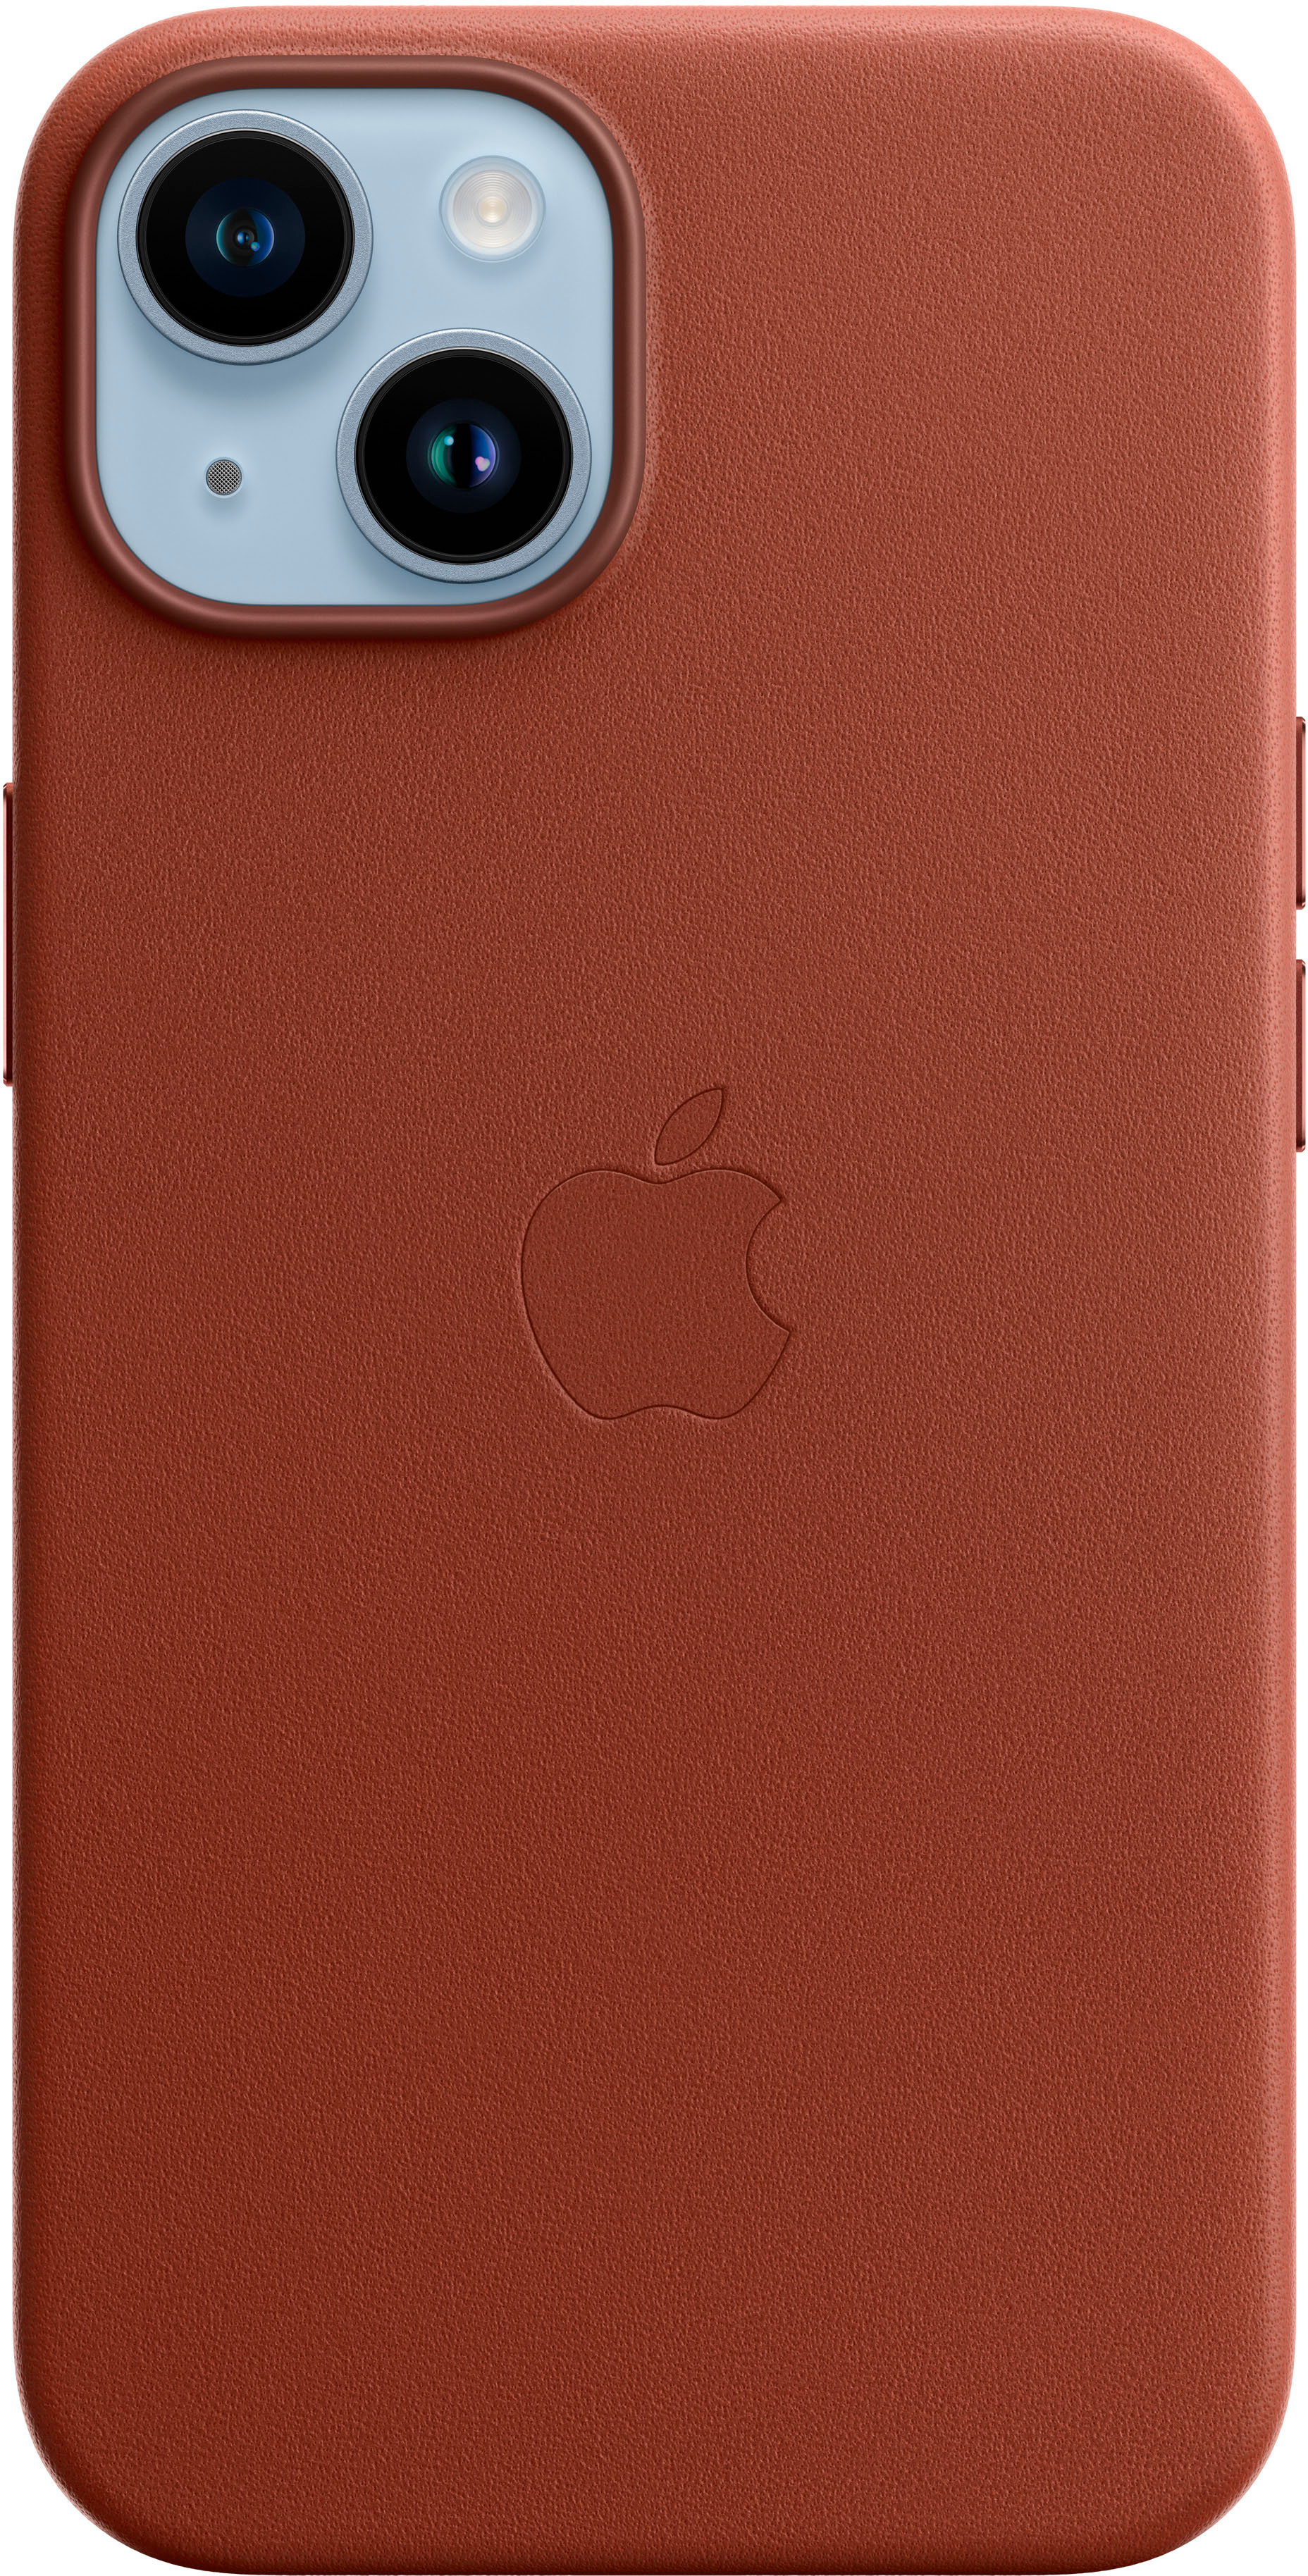 The beautiful journey of Apple's iPhone leather case